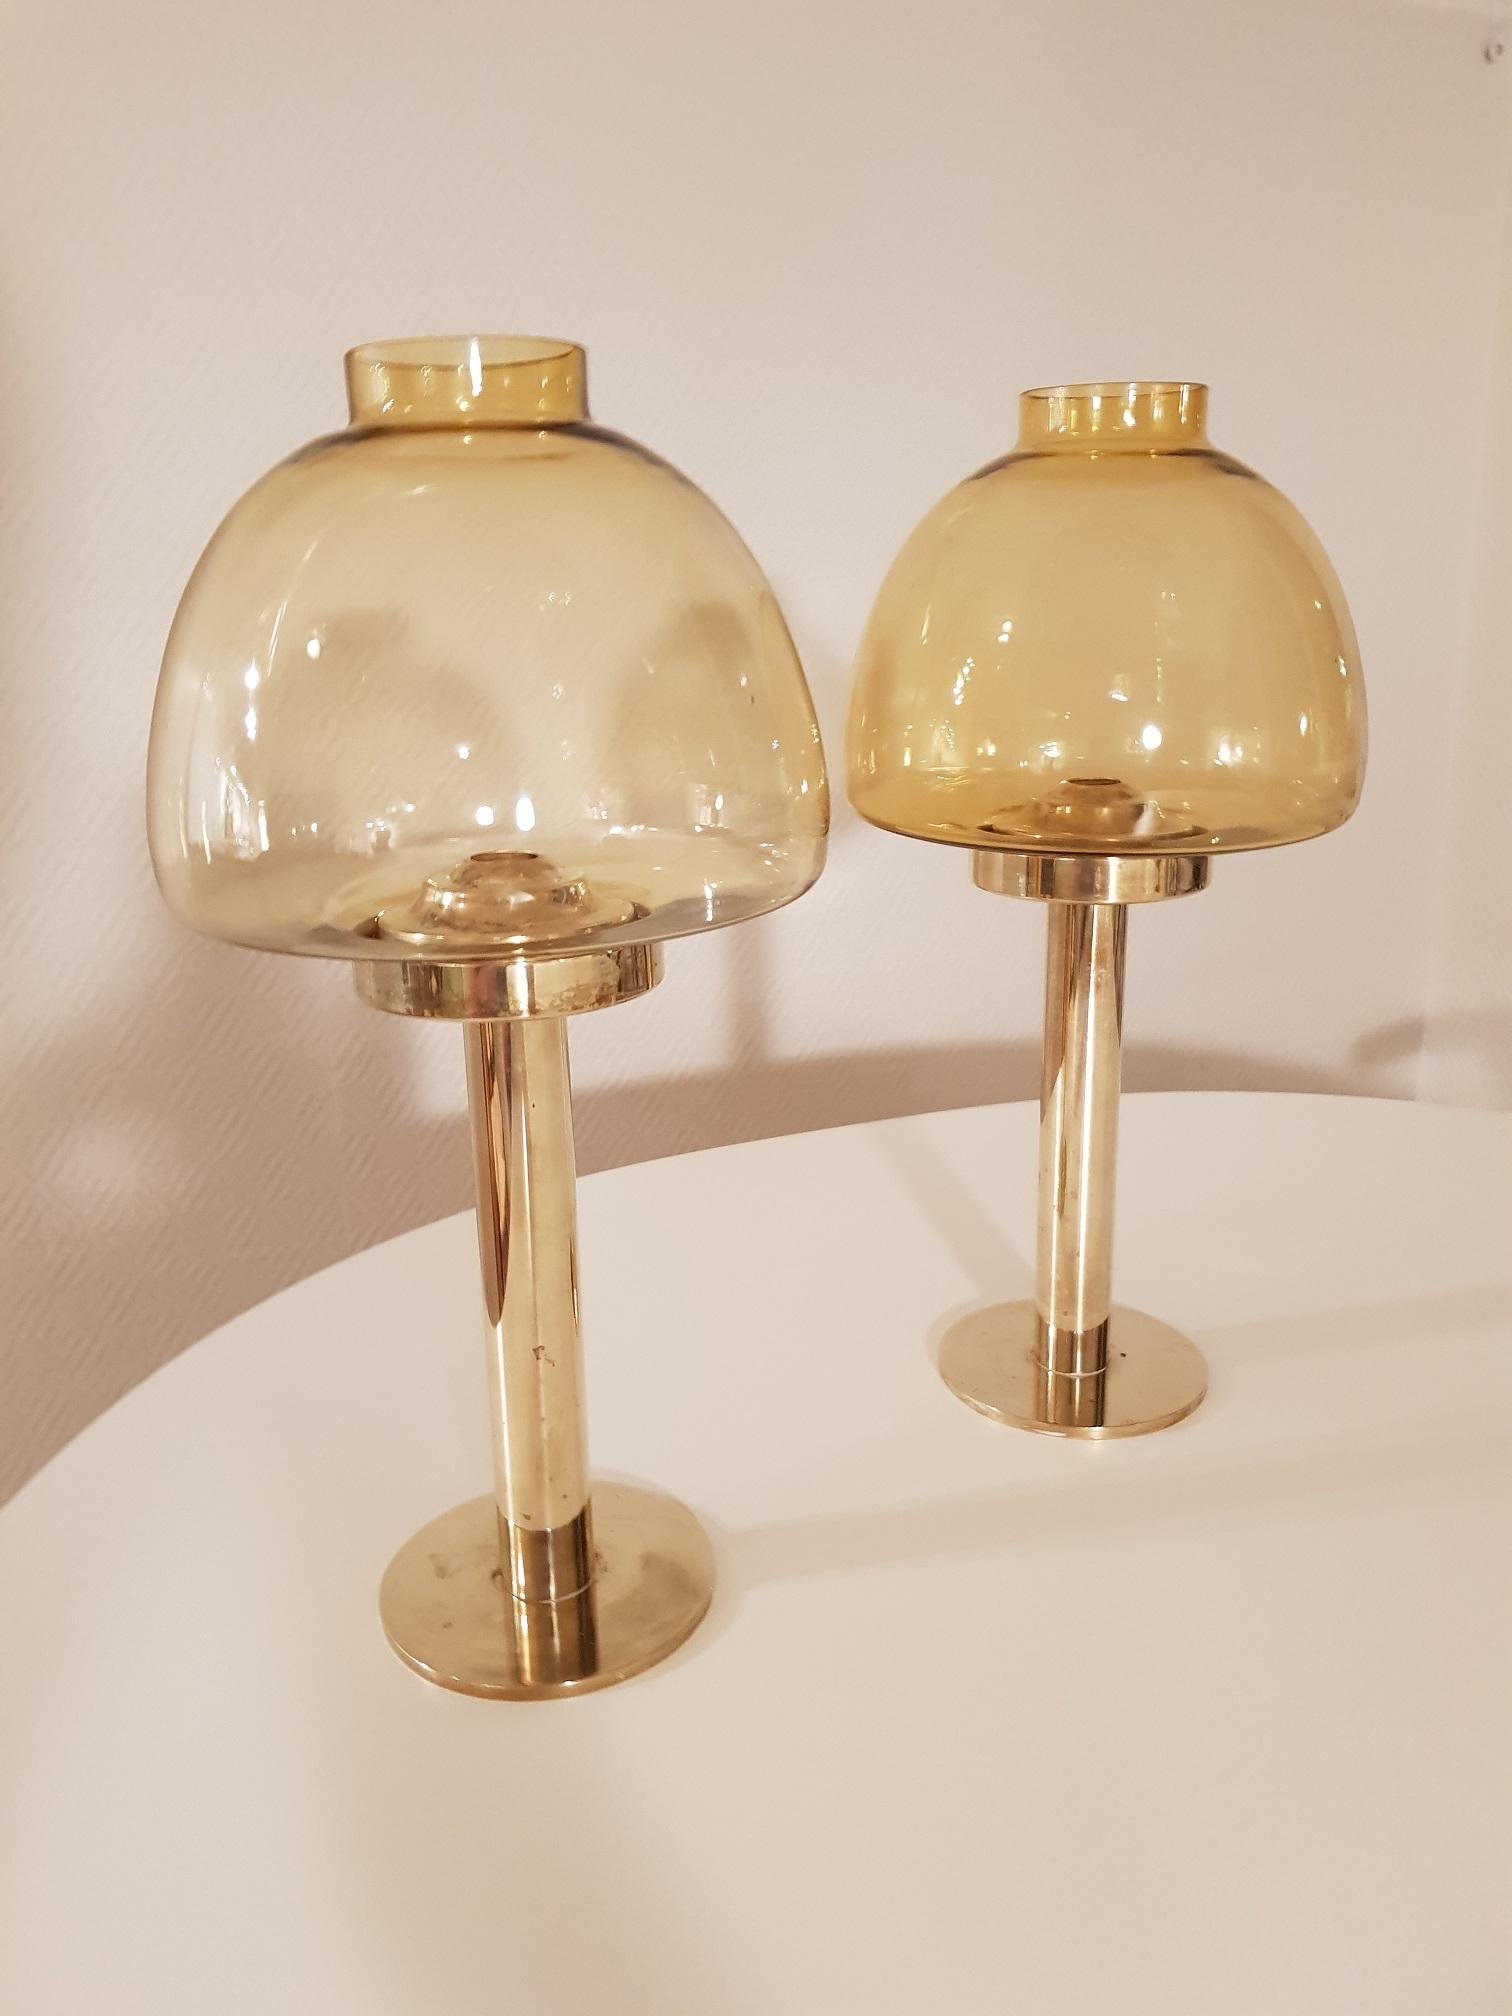 2 vintage candleholders in brass and smoked glass. Produced in the 1960s. Design by Swedish Hans-Agne Jakobsson and produced in Markard in Sweden. The design is made to hold a candle stick at the right and same height all the time. This was a